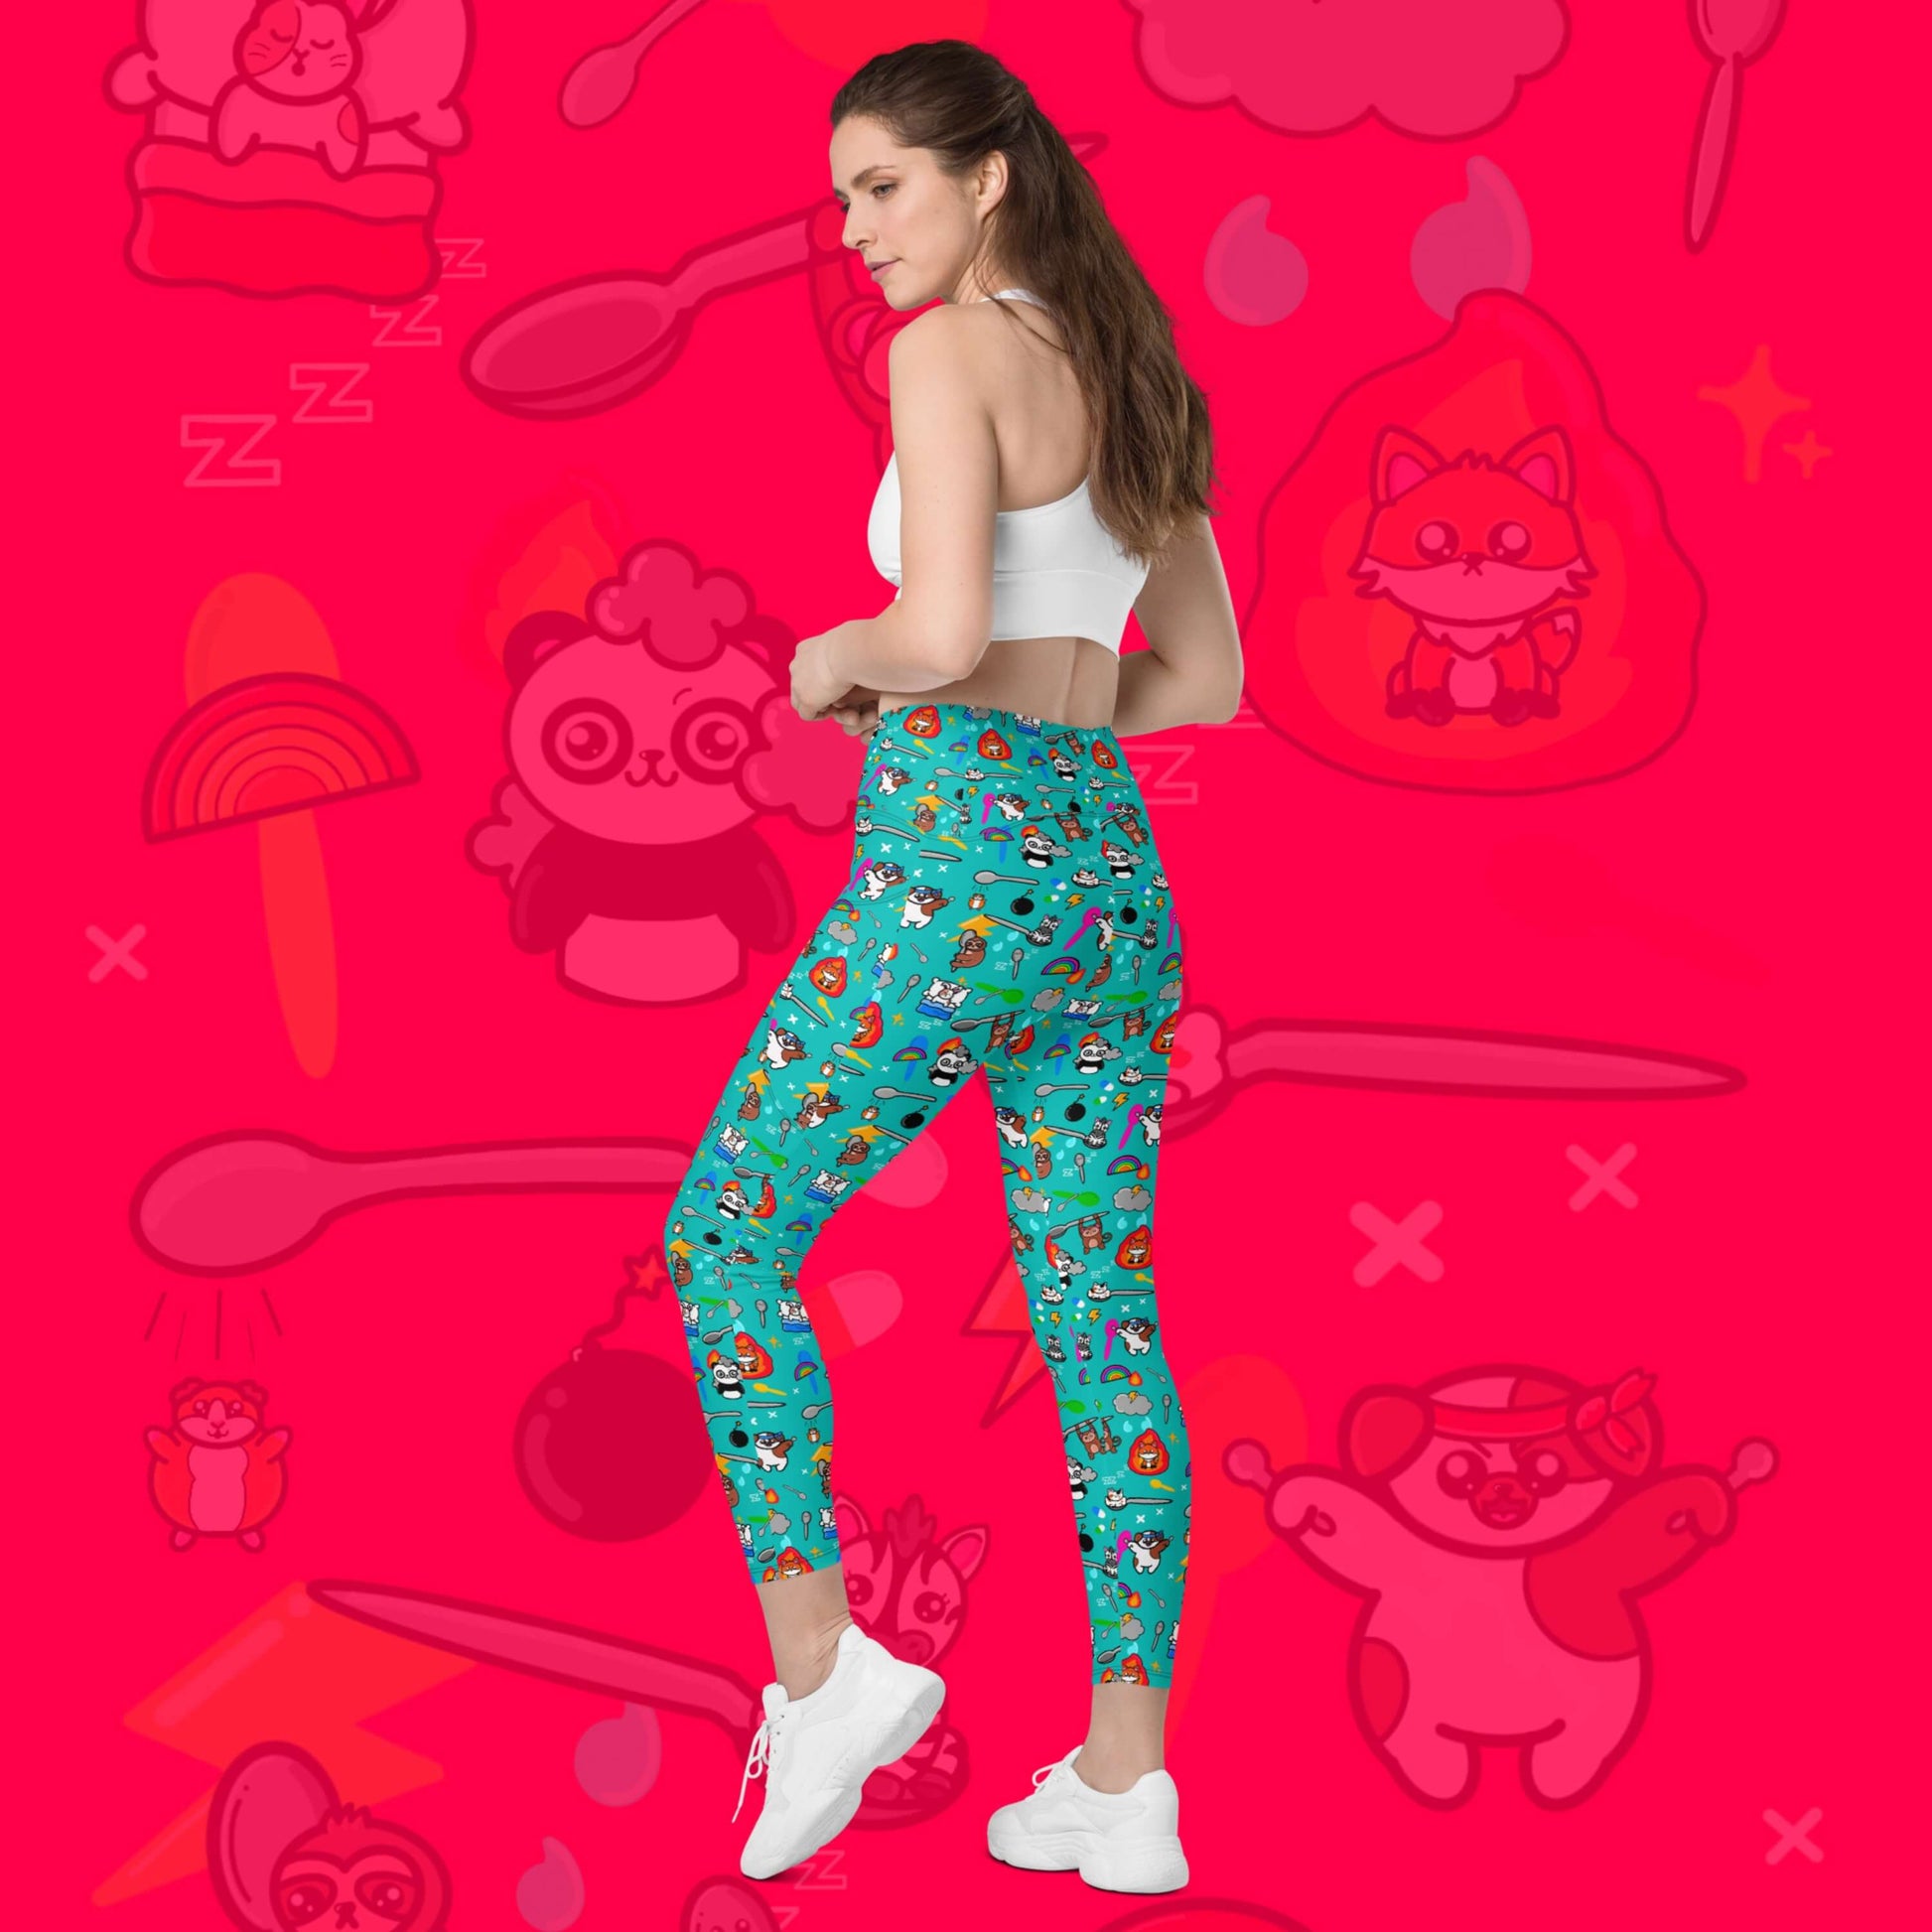 The Spoonie Leggings with Pockets modelled by a femme person with brown hair, white crop top and white trainers on a red background with a faded version of the print in the background. The blue leggings feature various invisible illness themed animals, rainbows, spoons, sparkles, flames, pills and lightning bolts. Raising awareness for hidden disabilities.